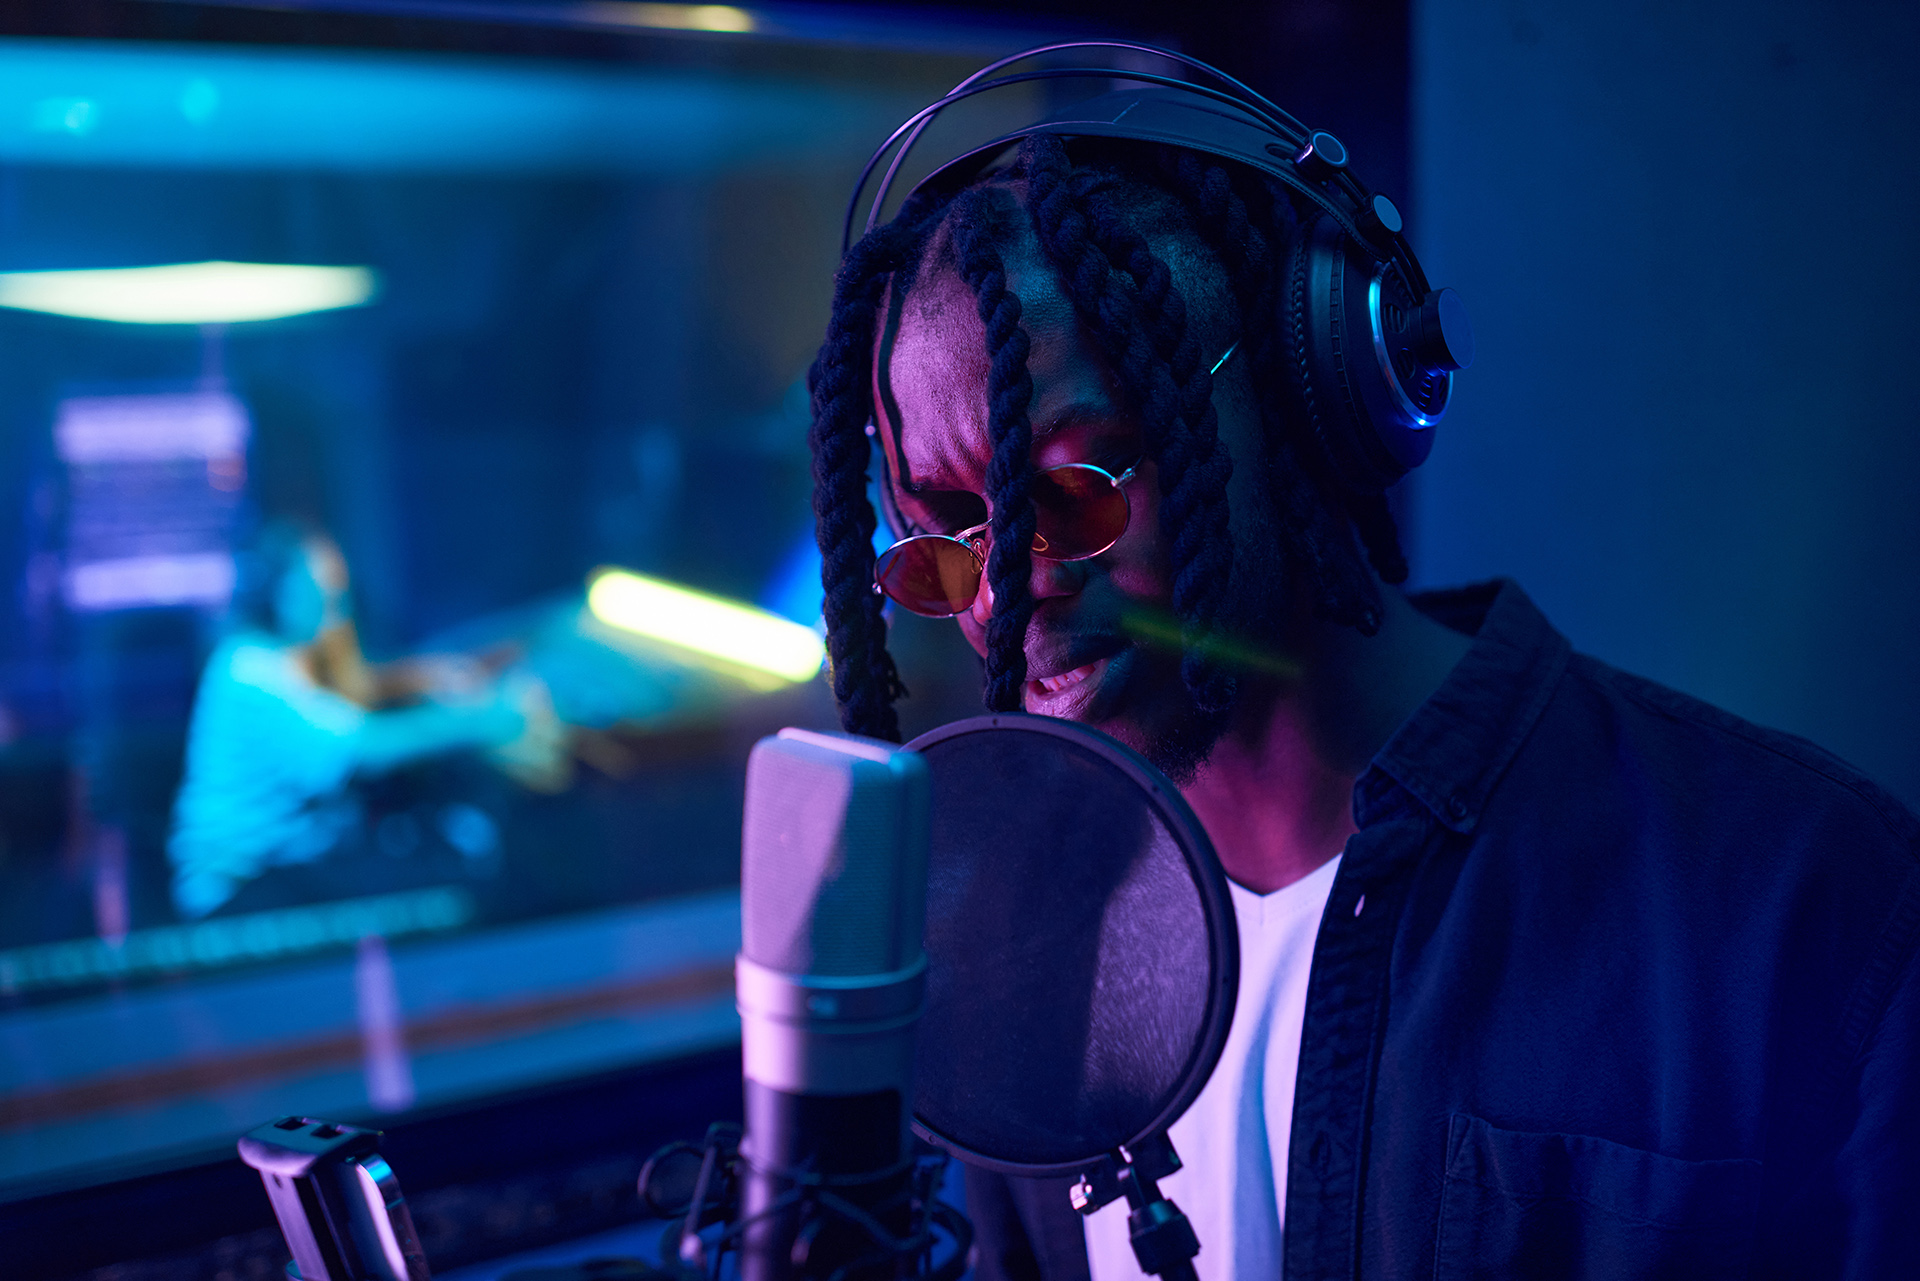 African young man in sunglasses with dreadlocks wearing headphones and singing to microphone his song in the studio